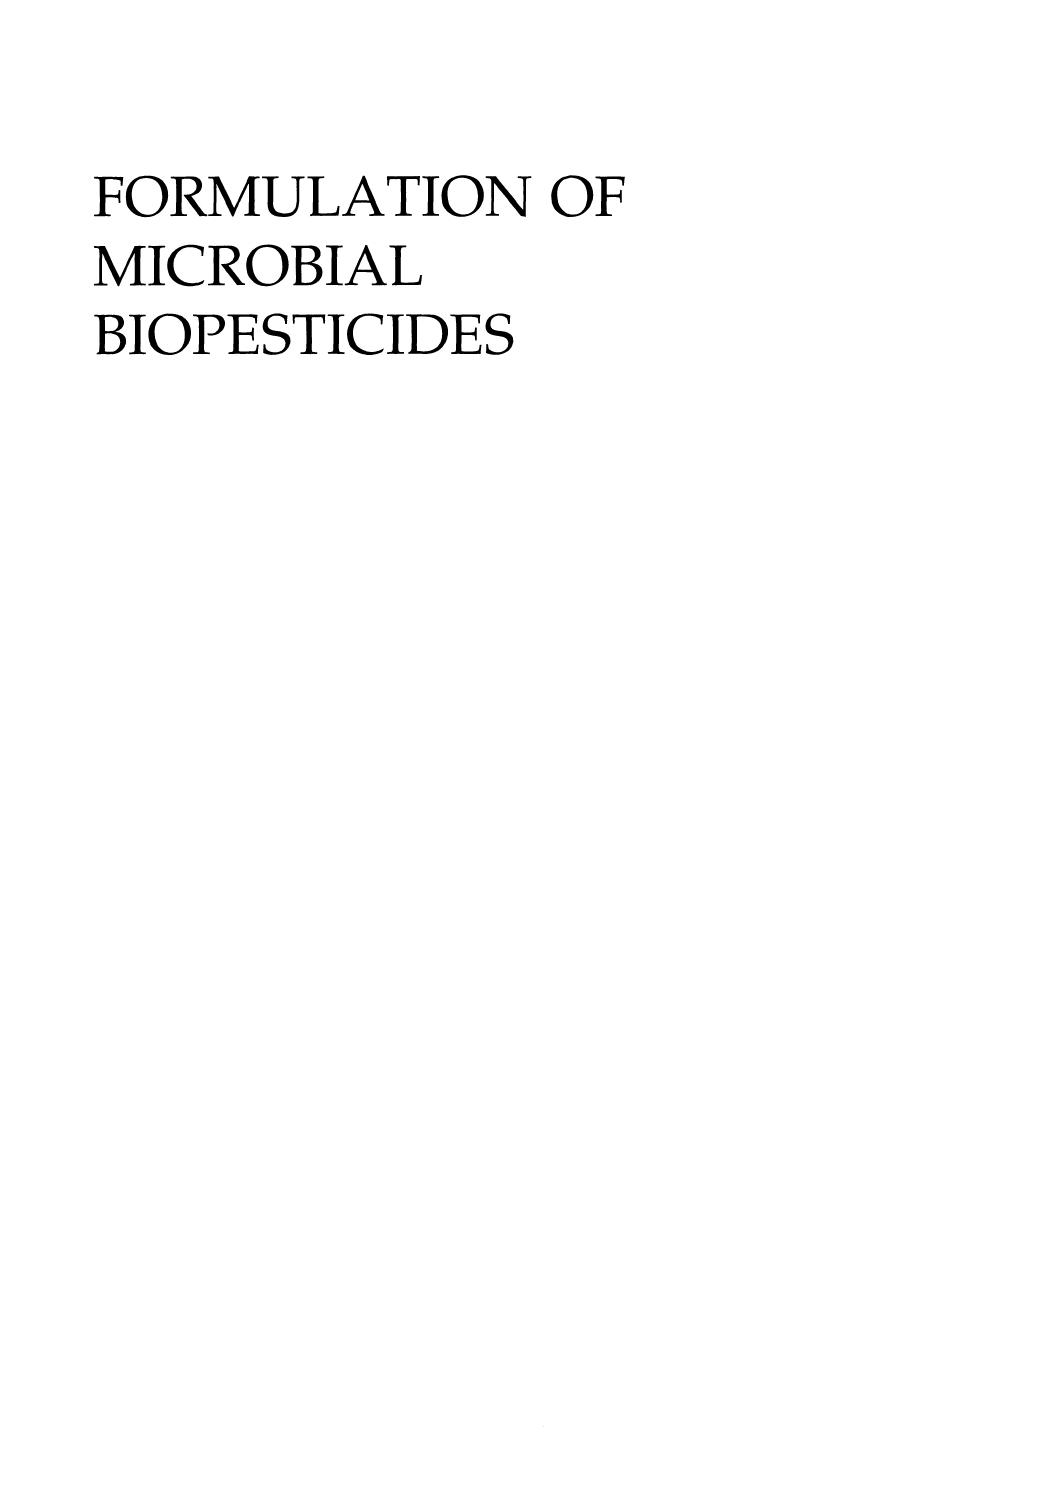 Formulation of Microbial Biopesticides  Beneficial microorganisms, nematodes and seed treatments  1998